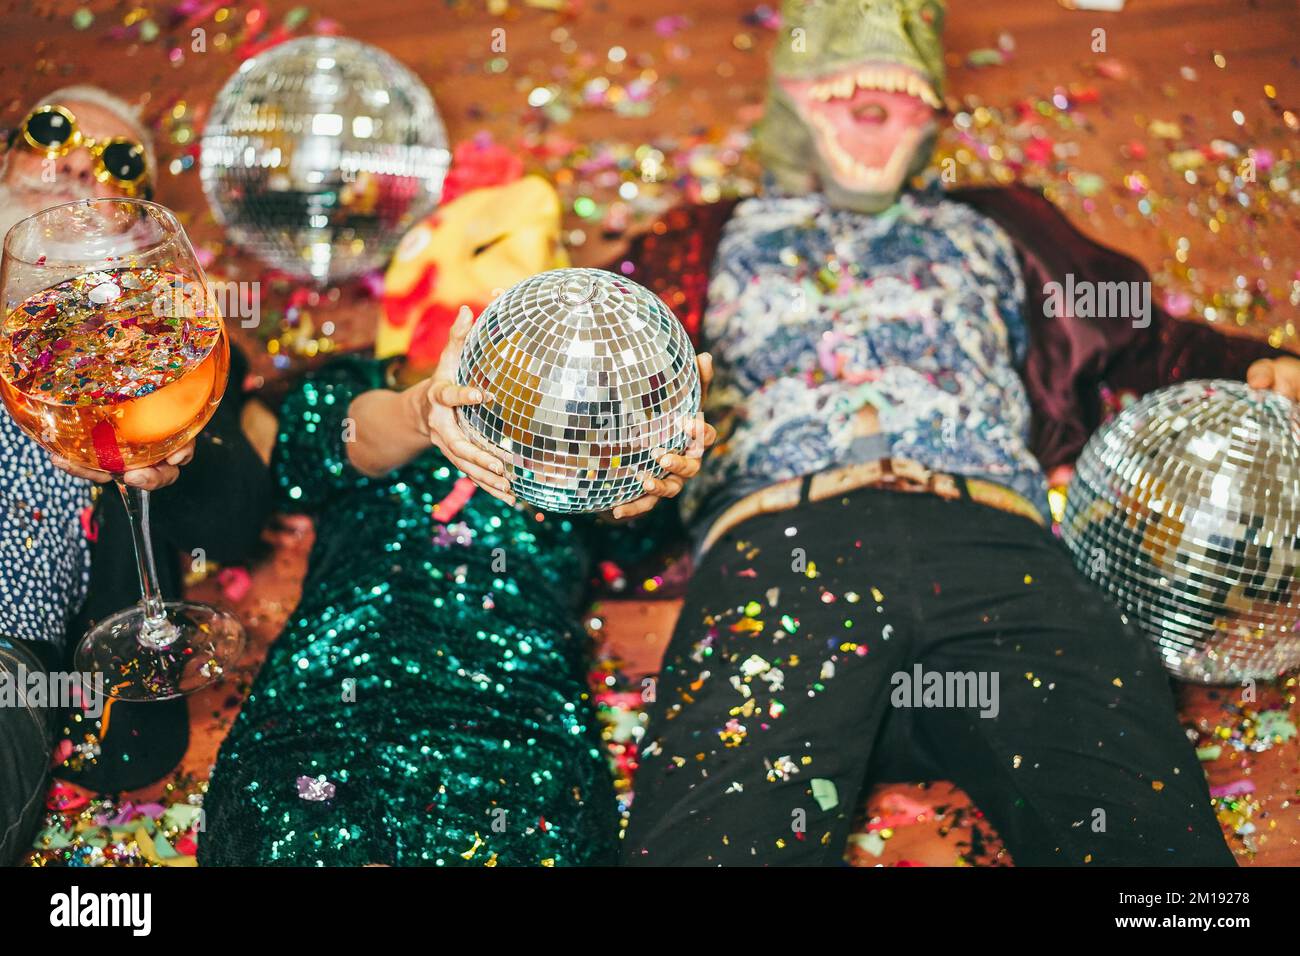 Crazy people celebrating carnival party inside nightclub - Focus on hands holding disco ball Stock Photo